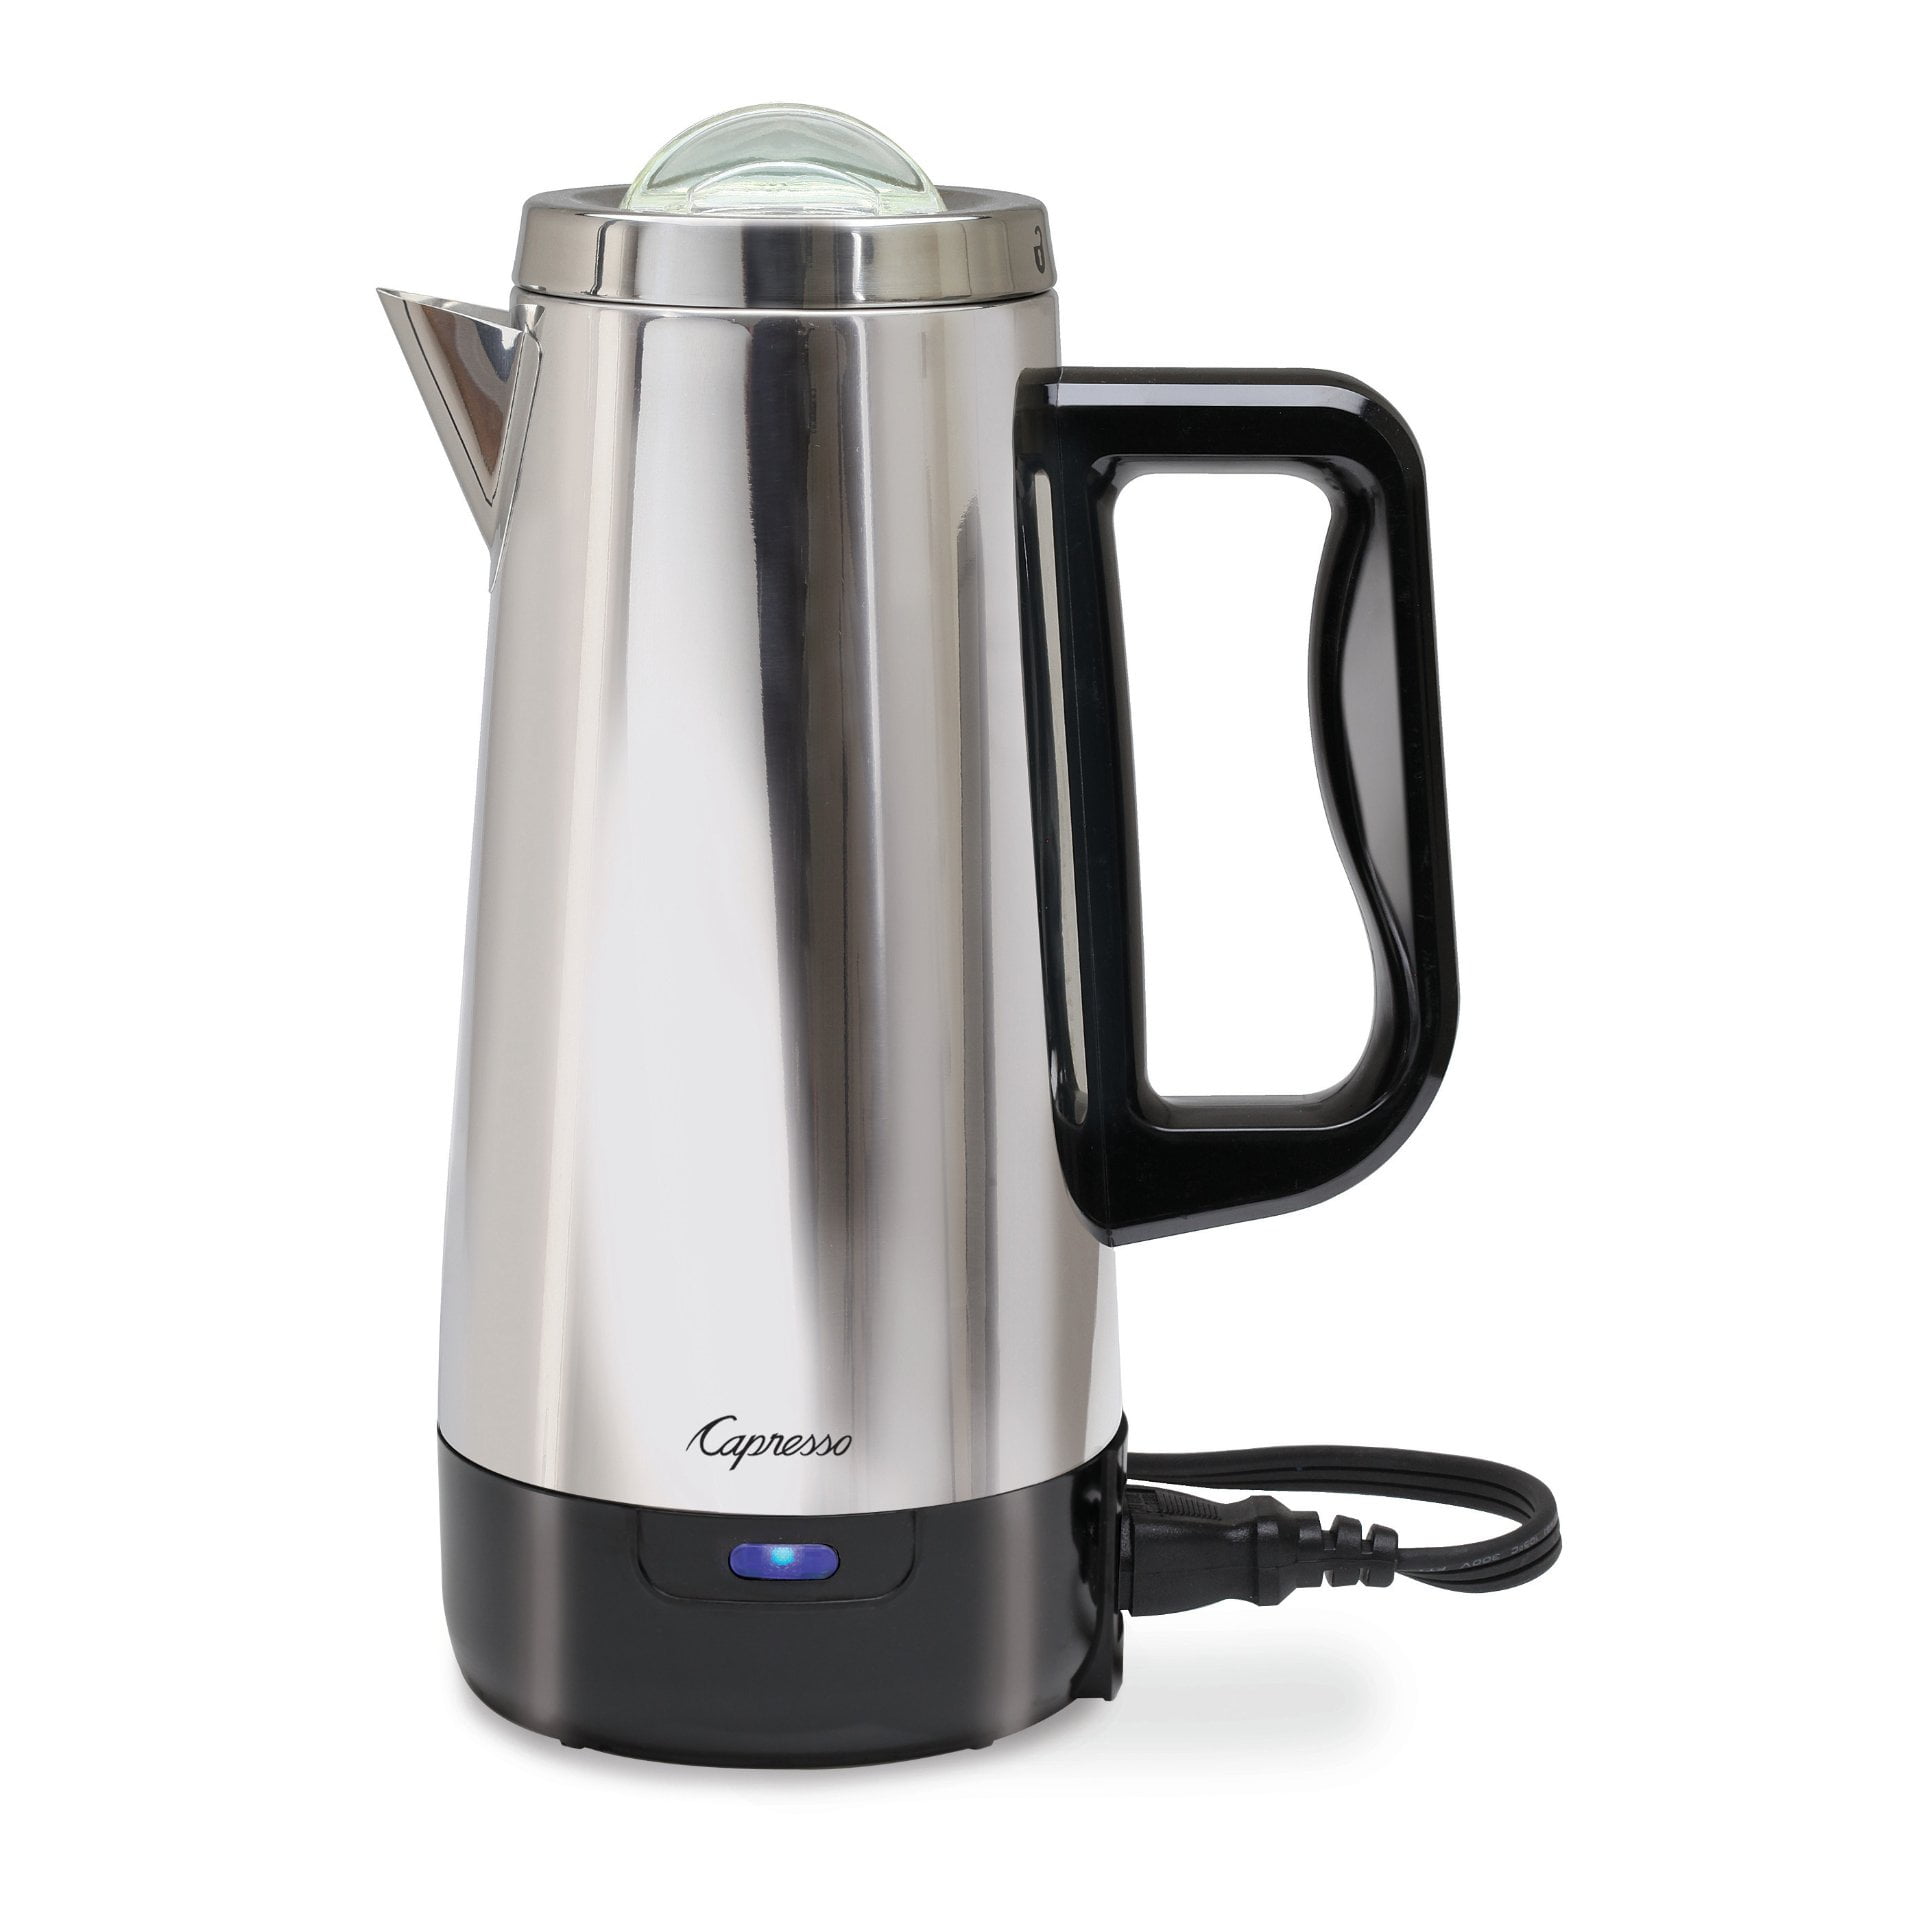 Moss & Stone Electric Coffee Percolator , Camping Coffee Pot Silver Body with Stainless Steel Lids Coffee Maker, Percolator Electric Pot - 10 Cups